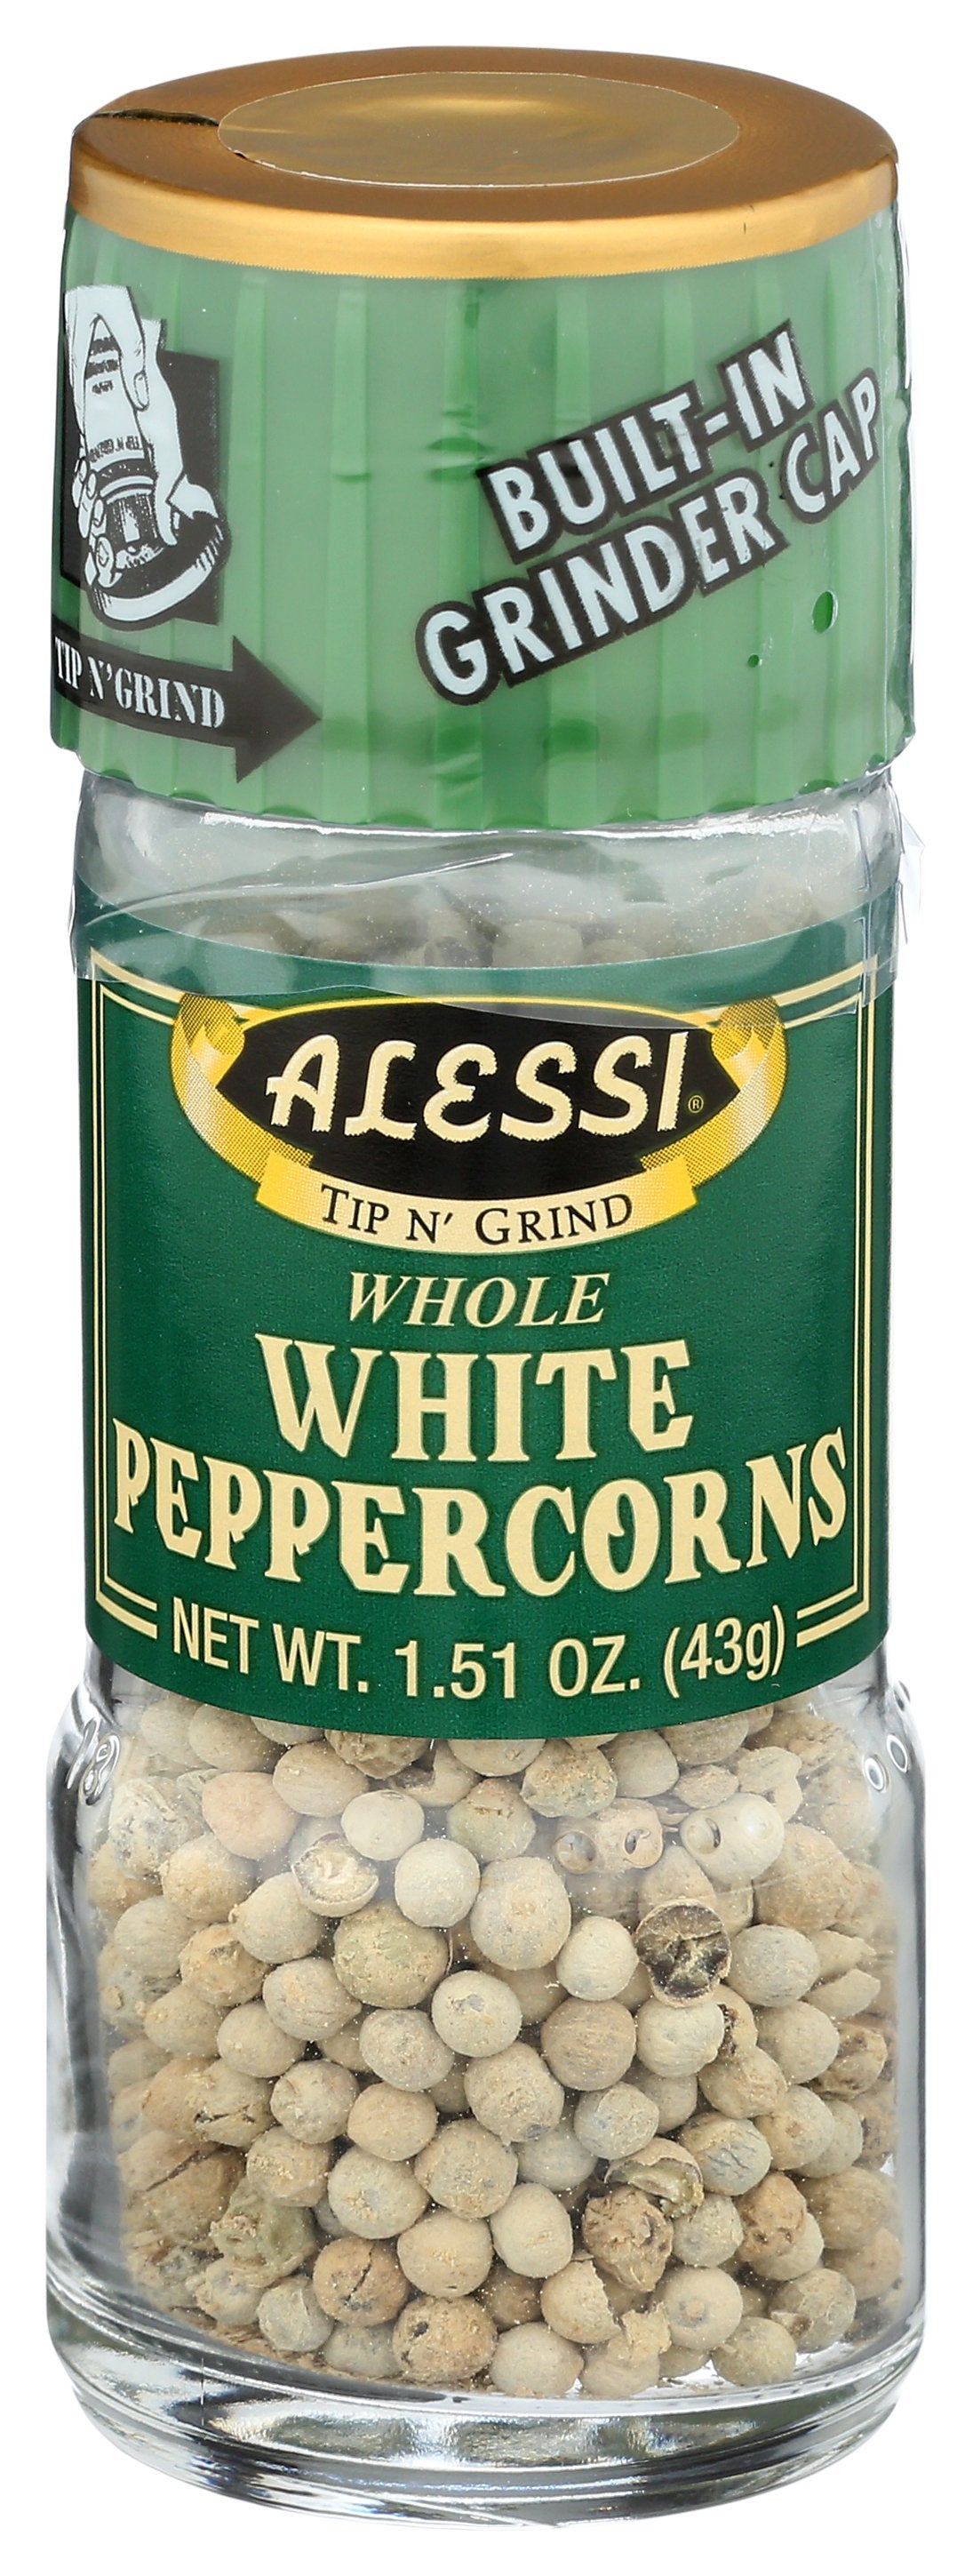 ALESSI GRINDER WHT PEPPERCRN WHL - Case of 6